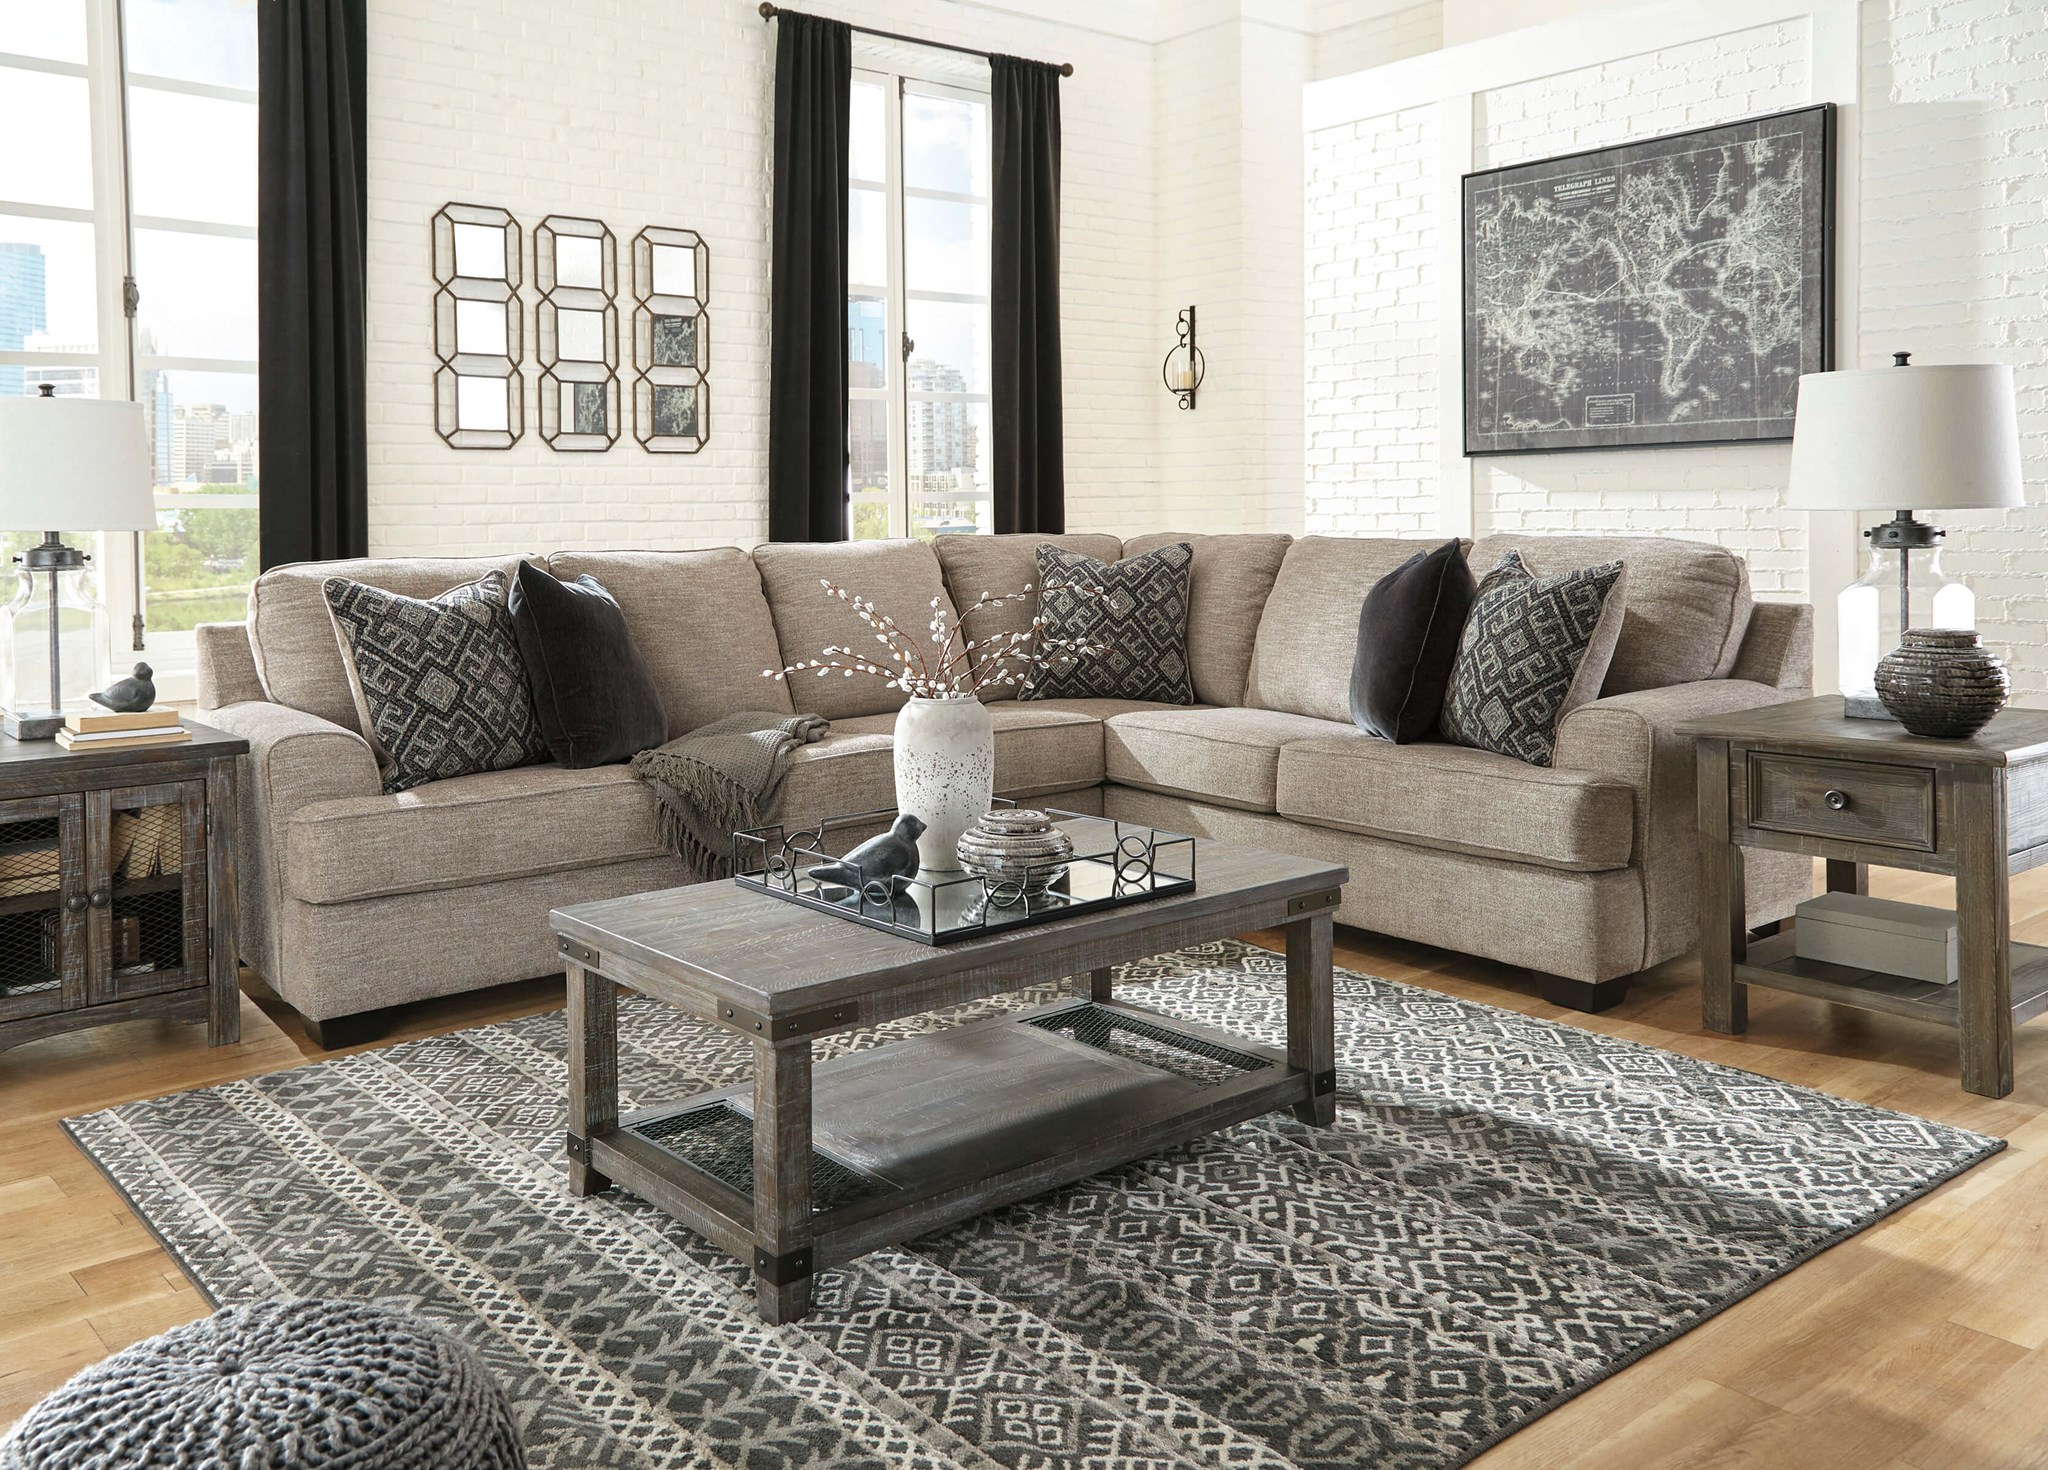 Explore the most exquisite selection of living room furniture in Yerevan 